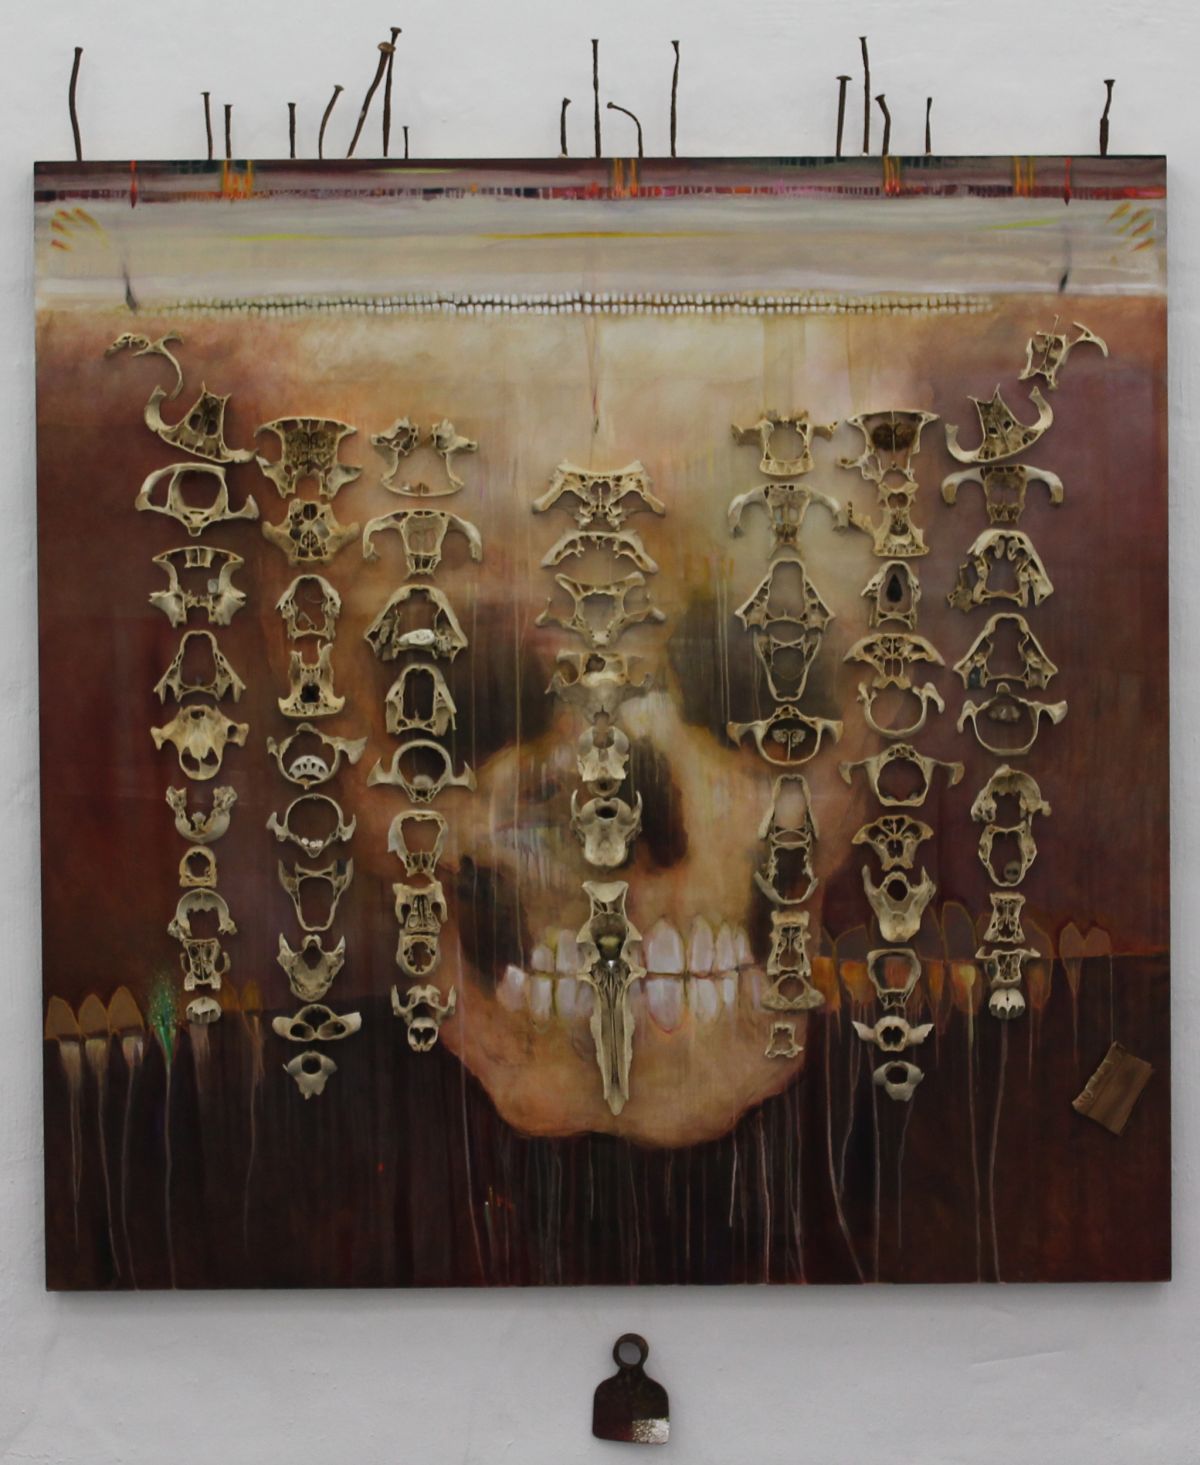 Click the image for a view of: Secular Reliquary. 2014. Oil on board, found objects.